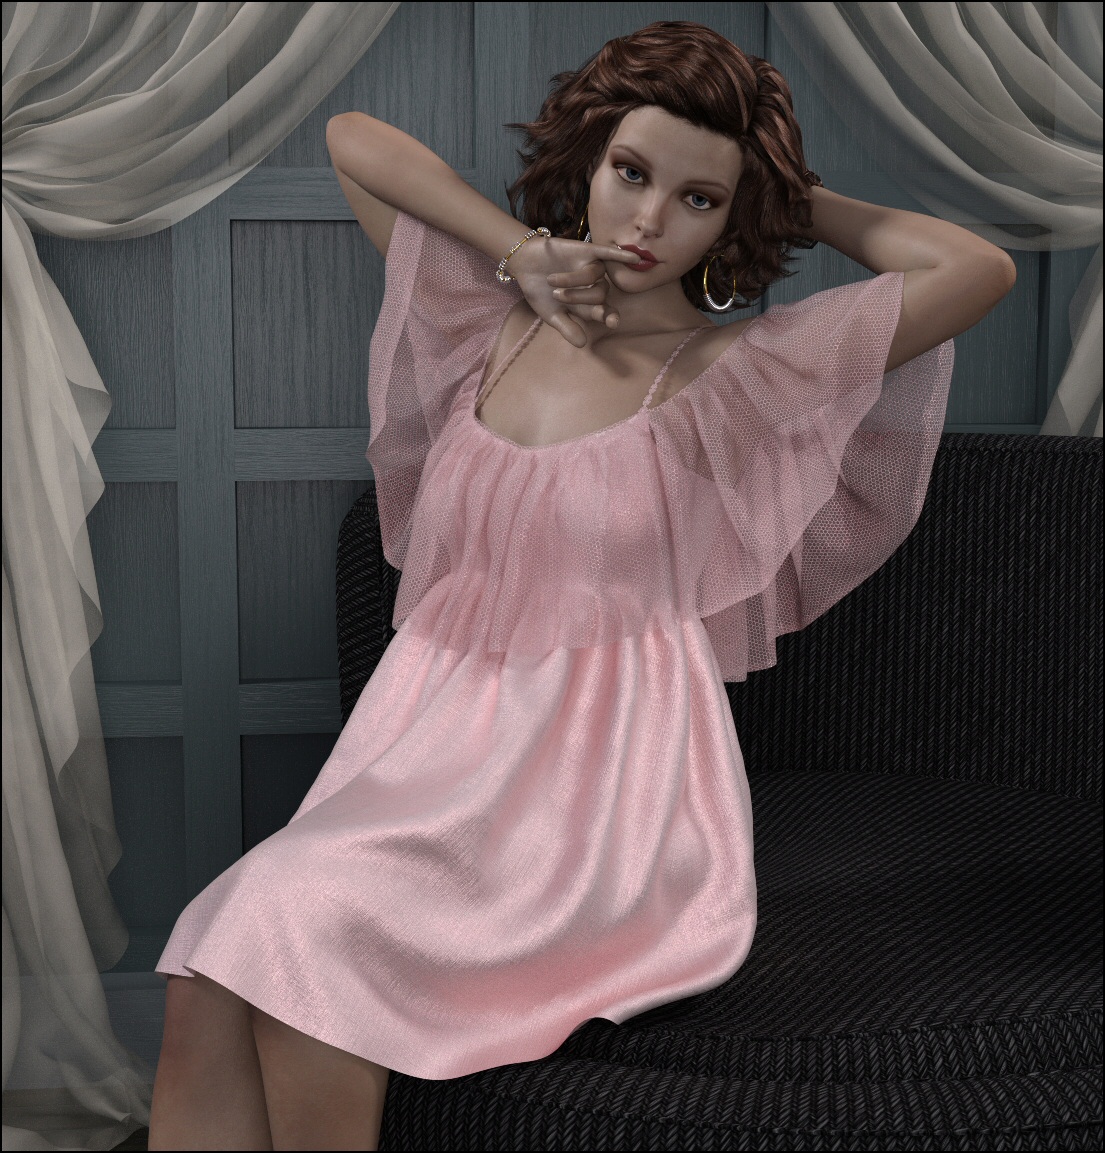 dForce - Gypsy Dress for G8F by: Lully, 3D Models by Daz 3D